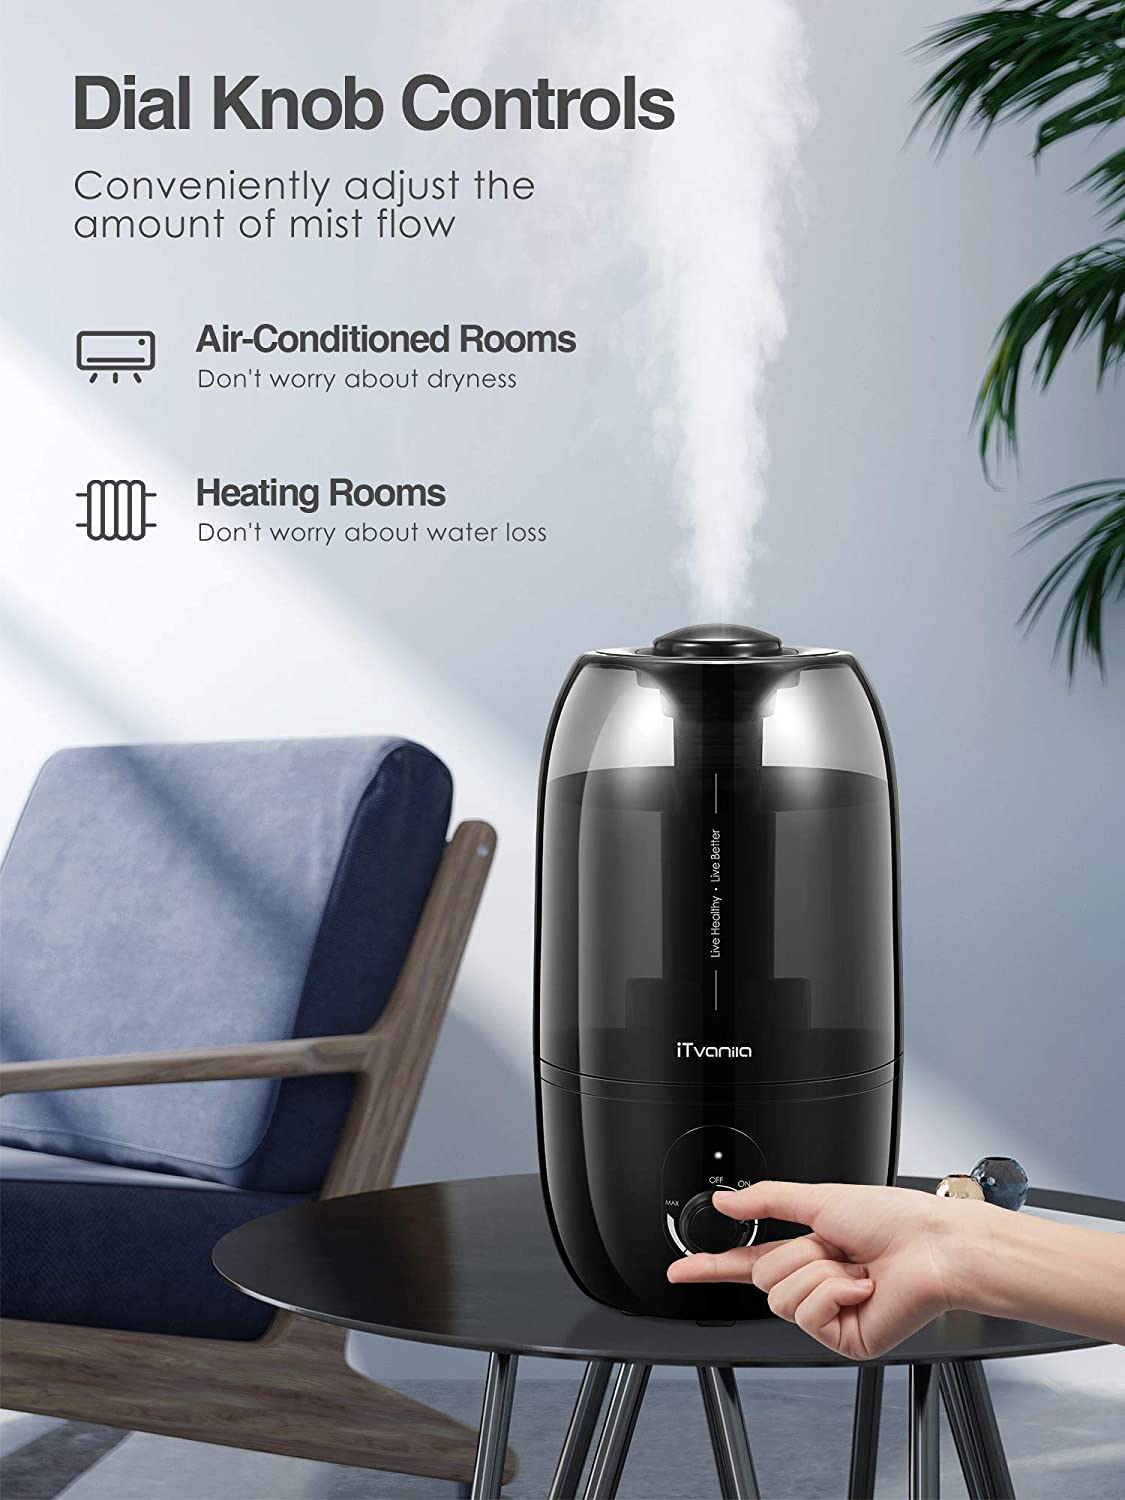 iTvanila -Quiet Humidifier 2.7 L/0.7 Gal Baby Humidifier HU-C1A Black , adjustable mist flow, Helps with dry skin, allergies, coughs